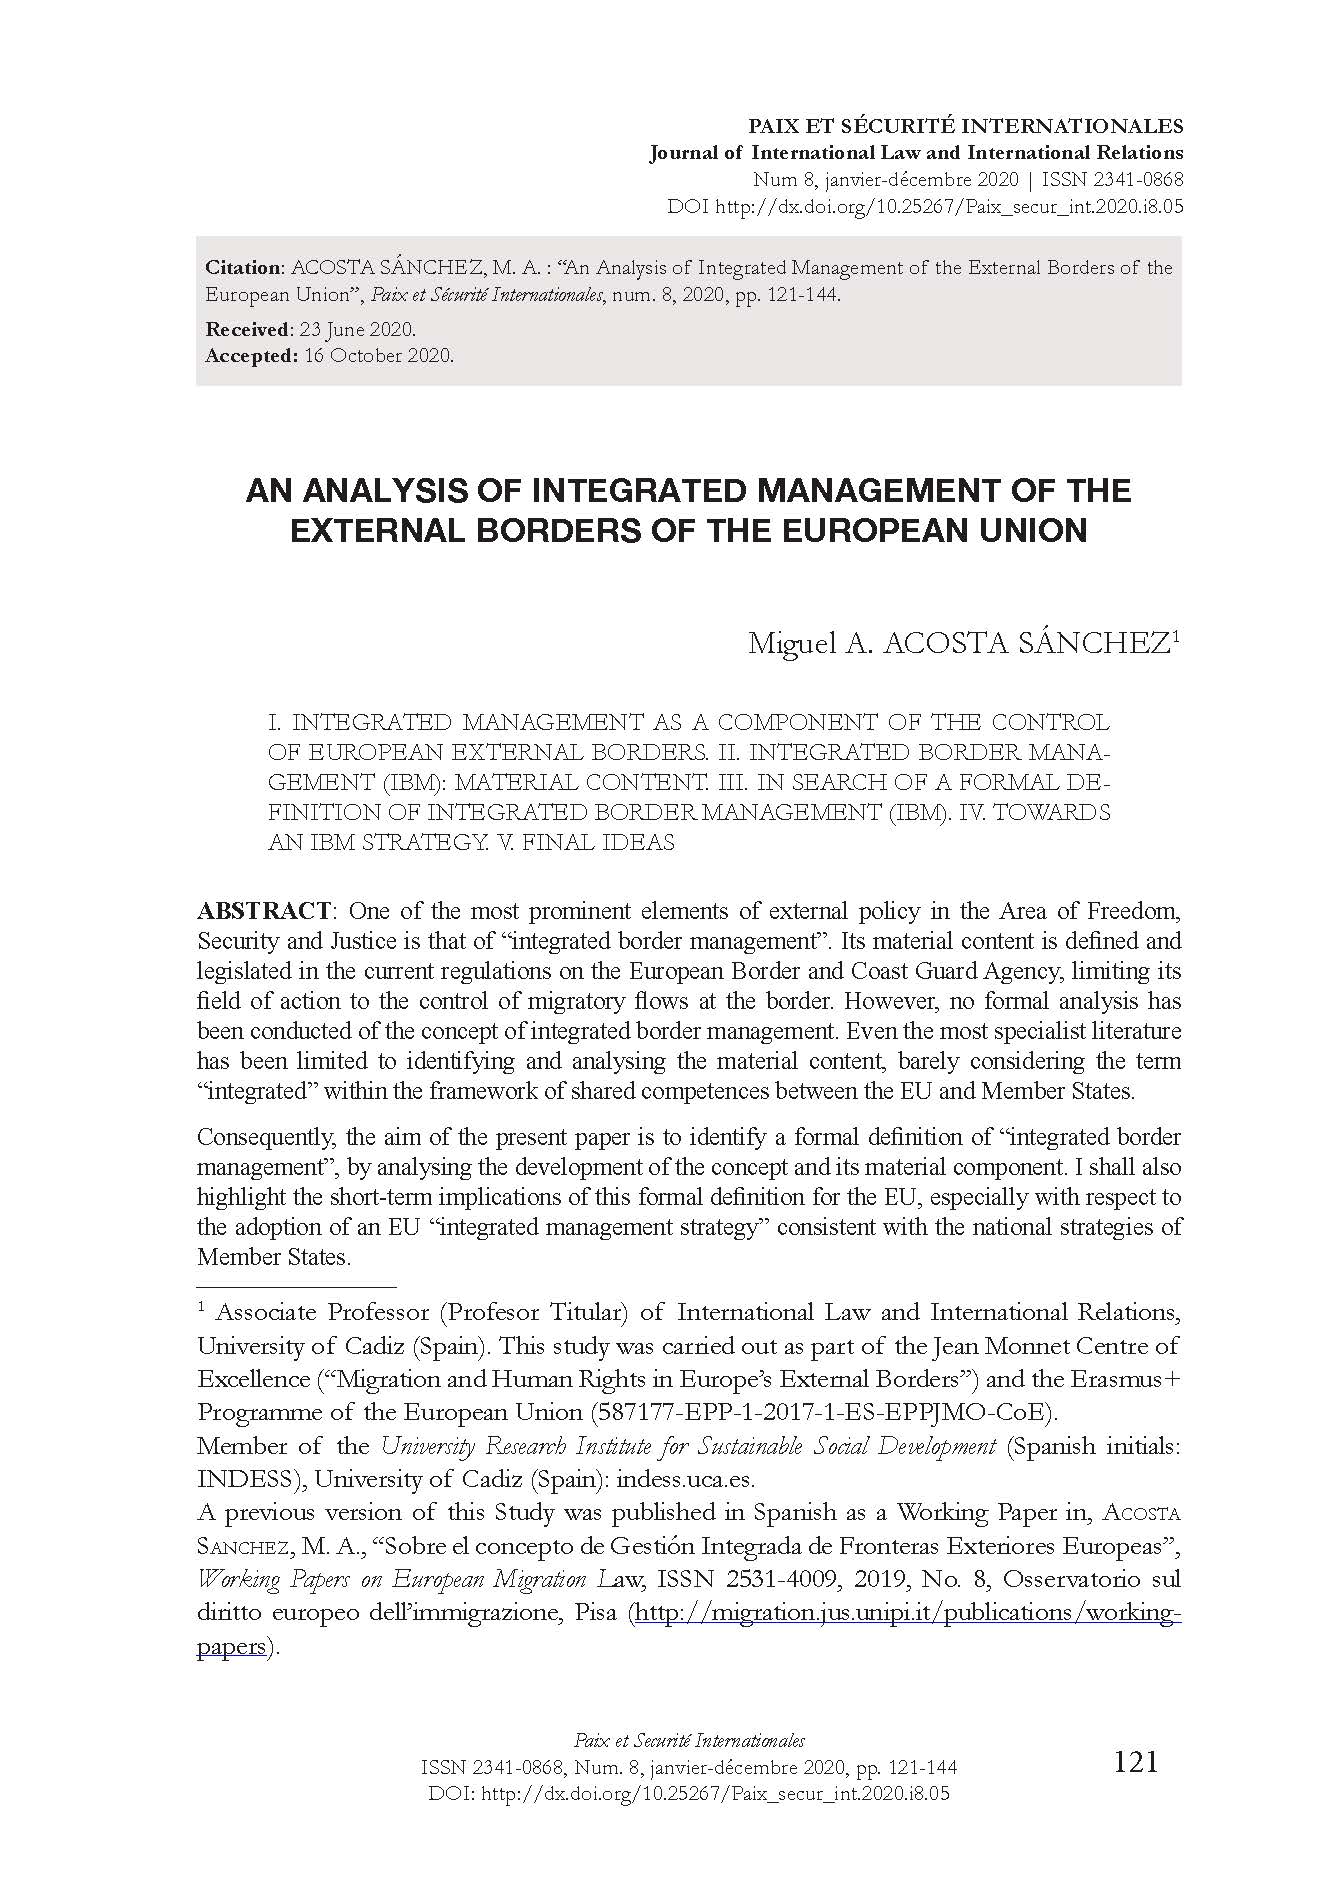 An Analysis of Integrated Management of the External Borders of the European Union